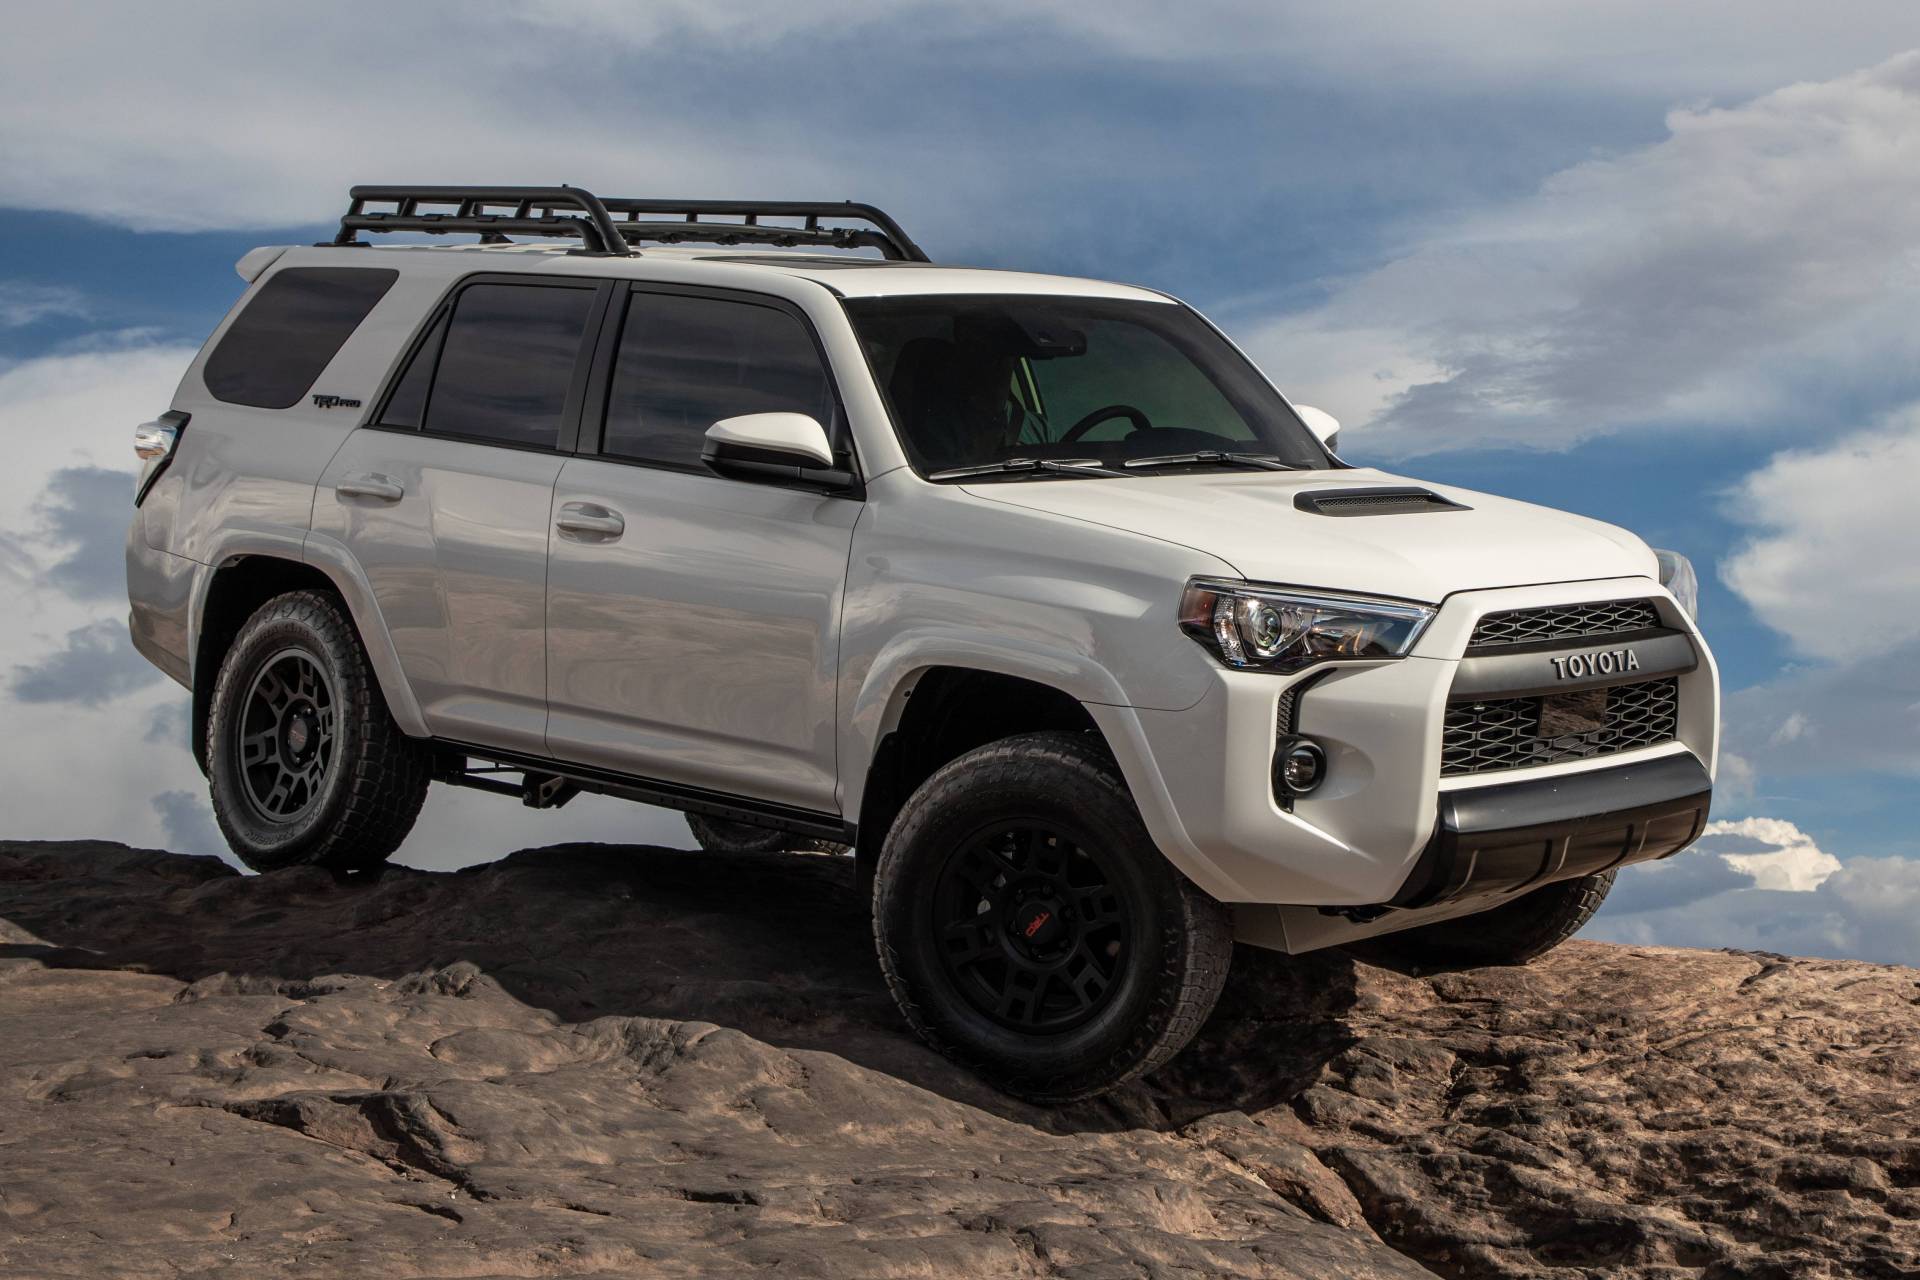 2020 TRD Pro White Mountains (Buyers Guide)